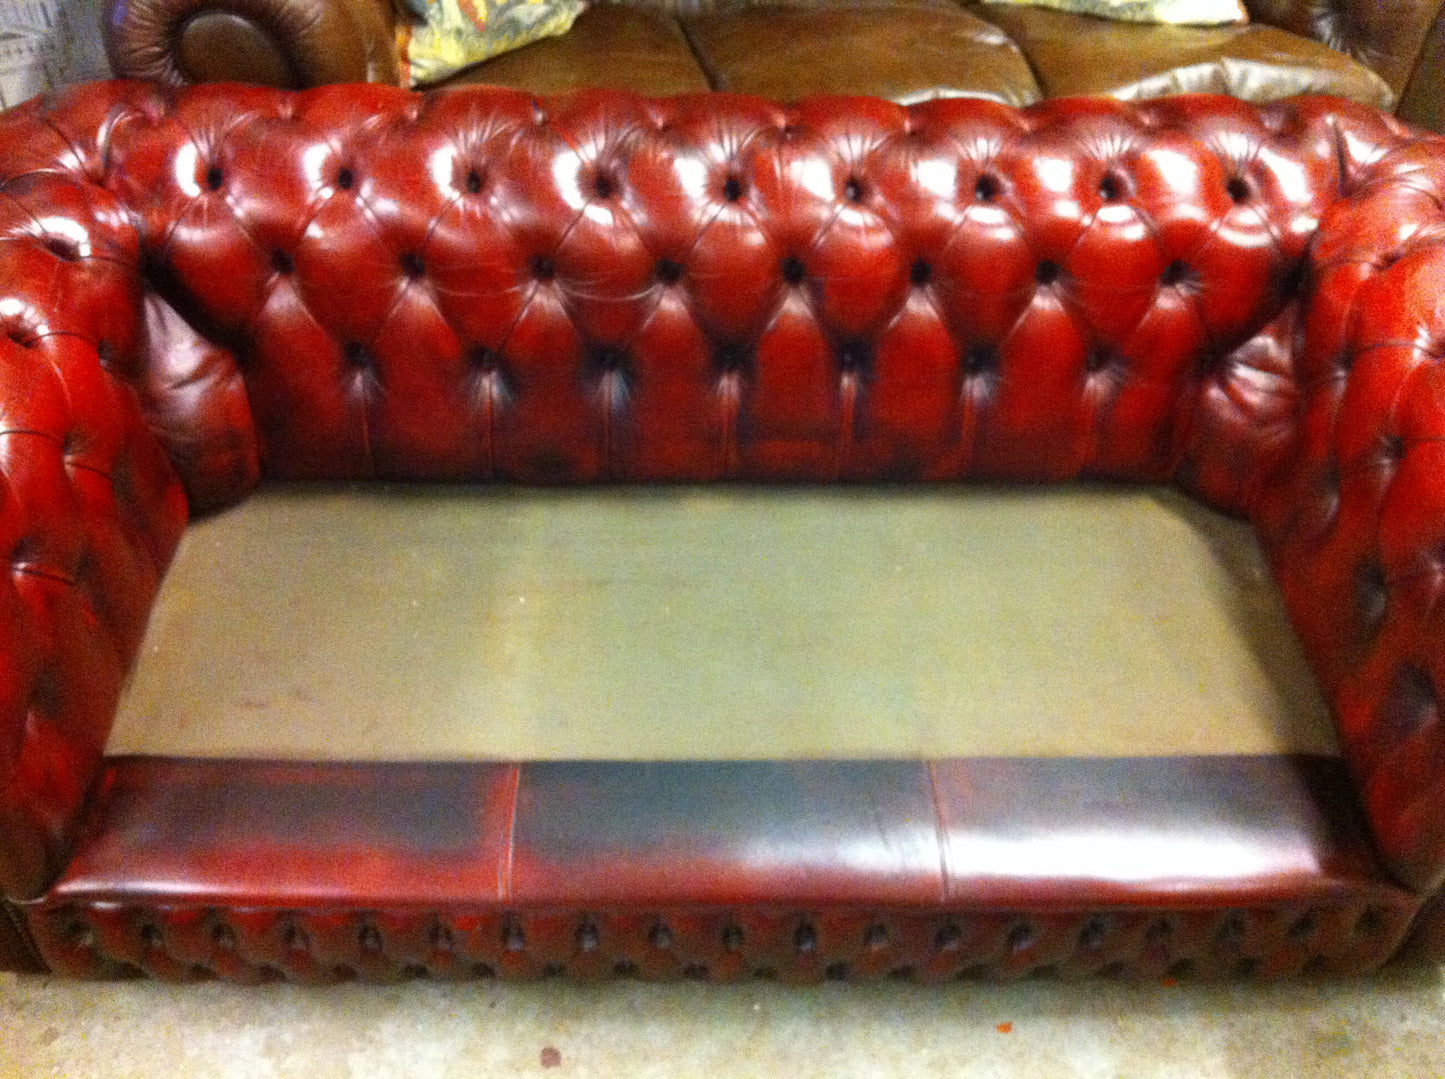 Lovely Late 1970's Vintage Hand Dyed Oxblood Leather 3 seater Chesterfield Sofa